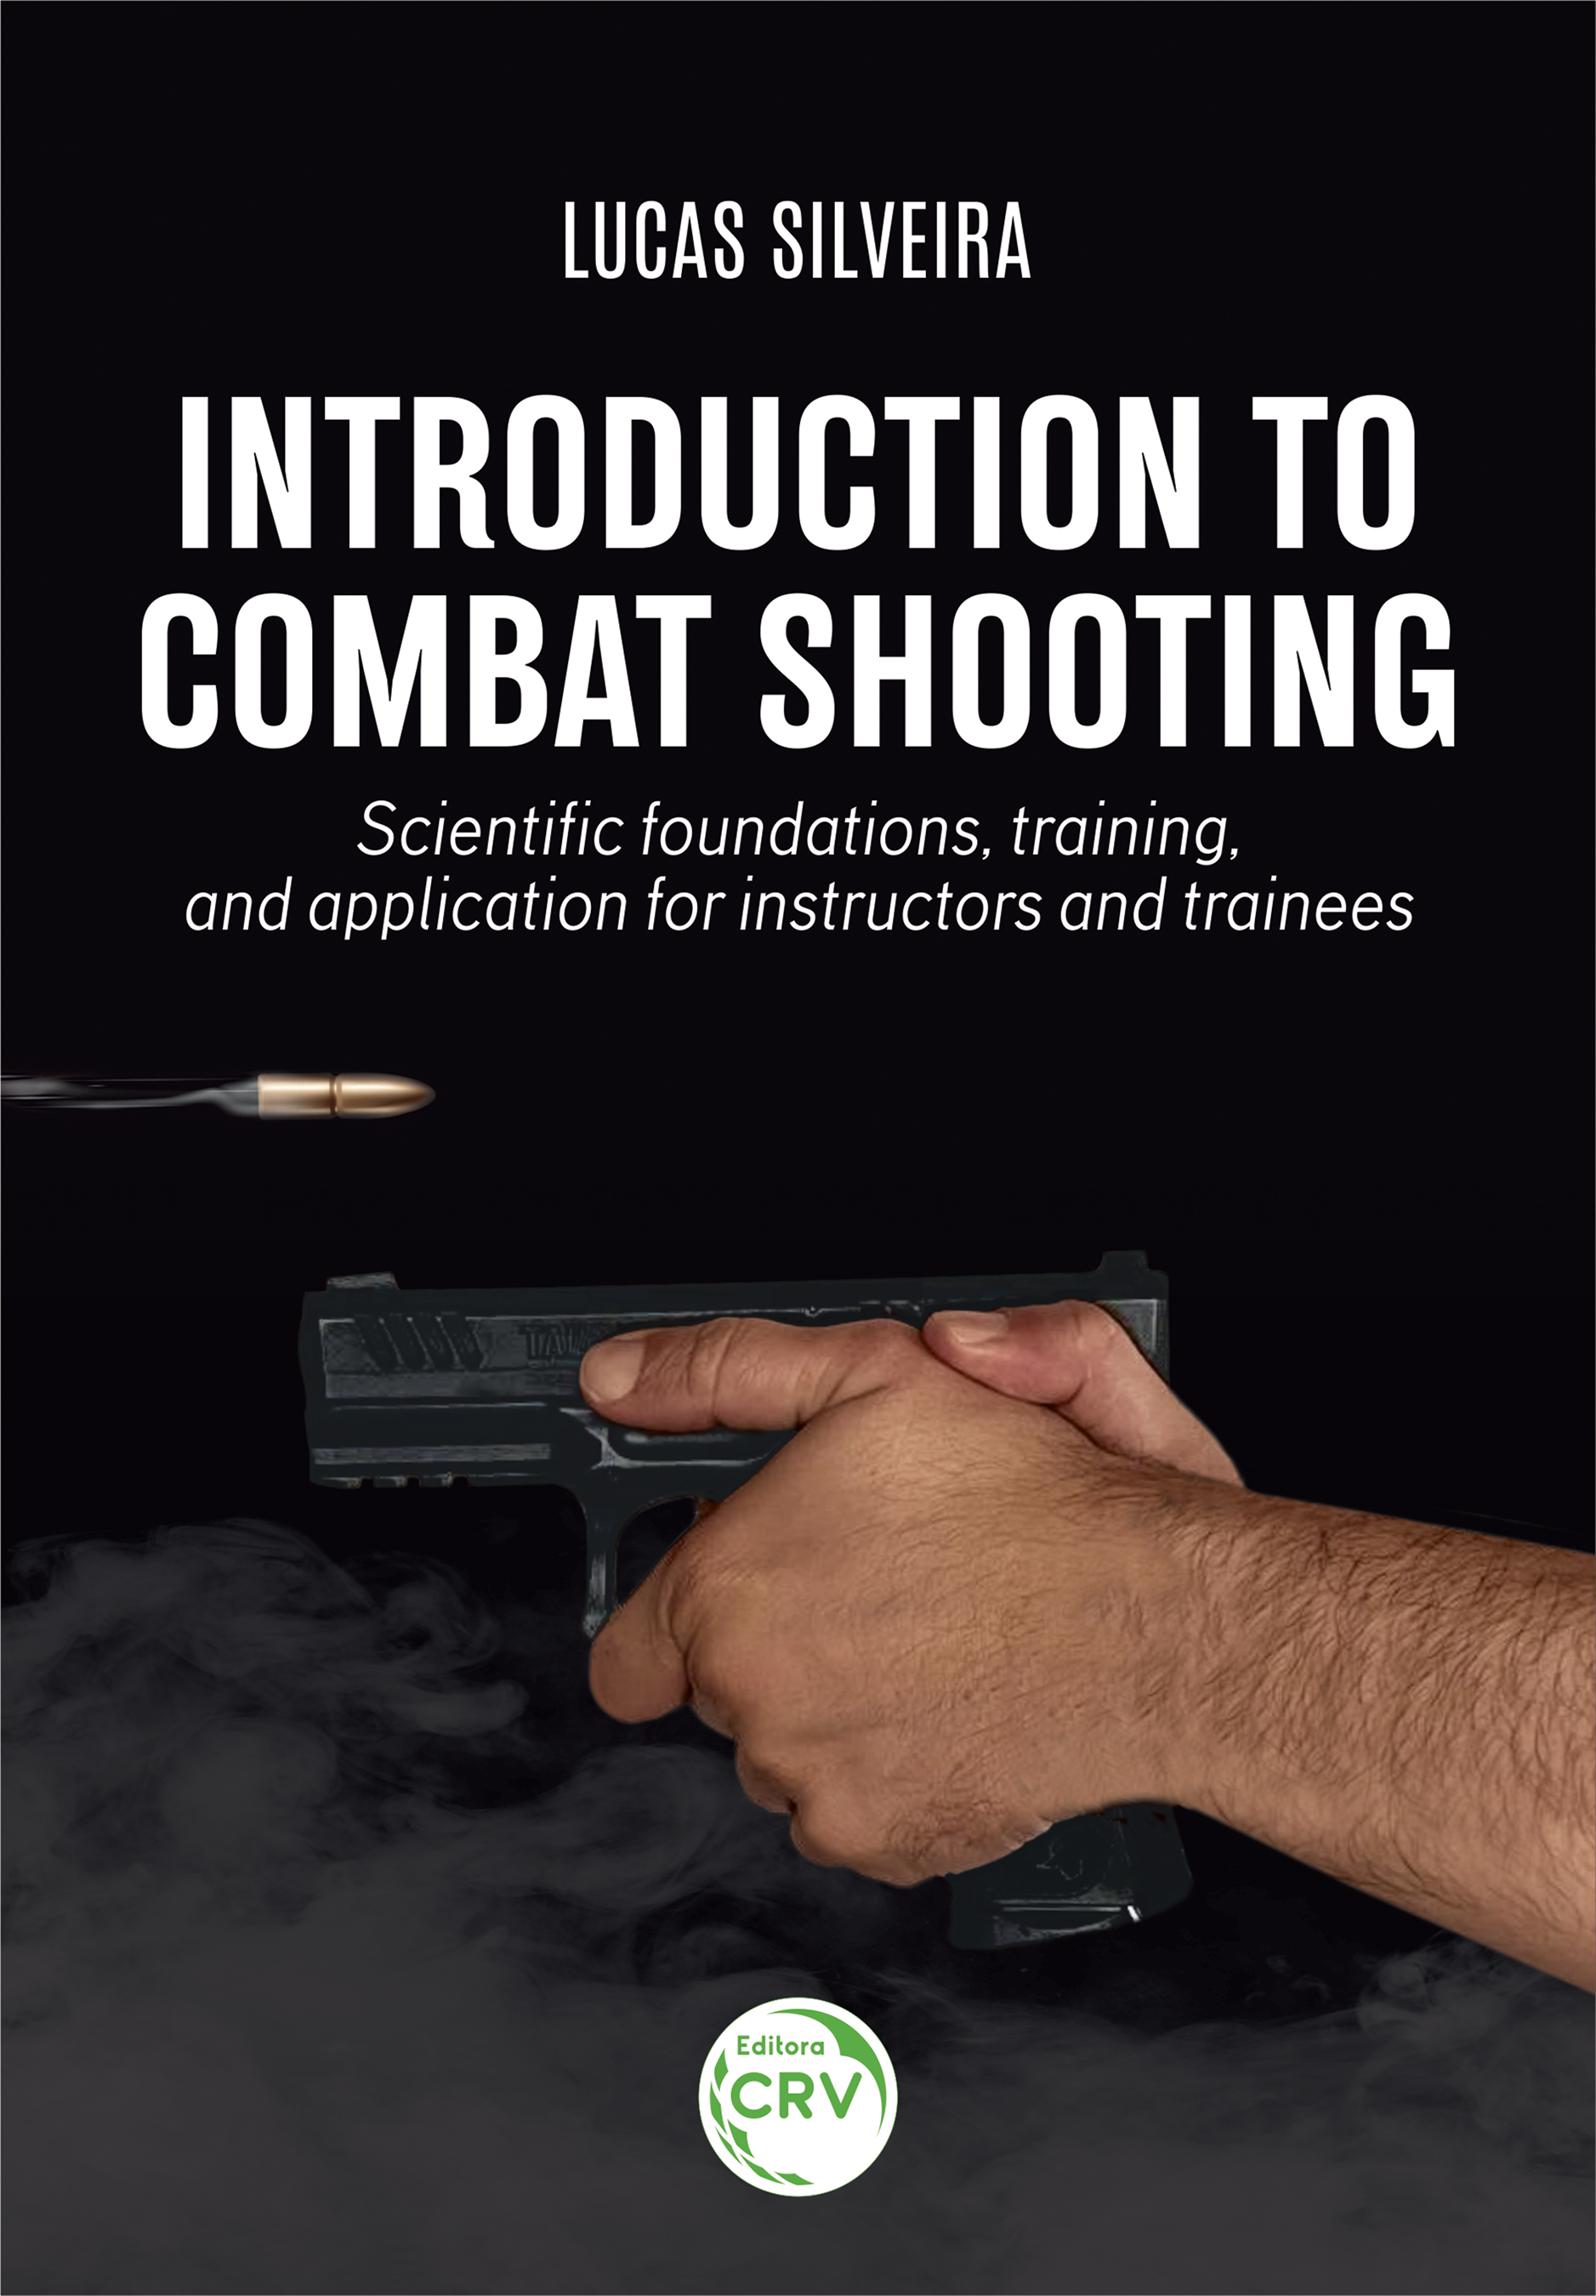 Capa do livro: Introduction to combat shooting: <br>Scientific foundations, training, and application for instructors and trainees